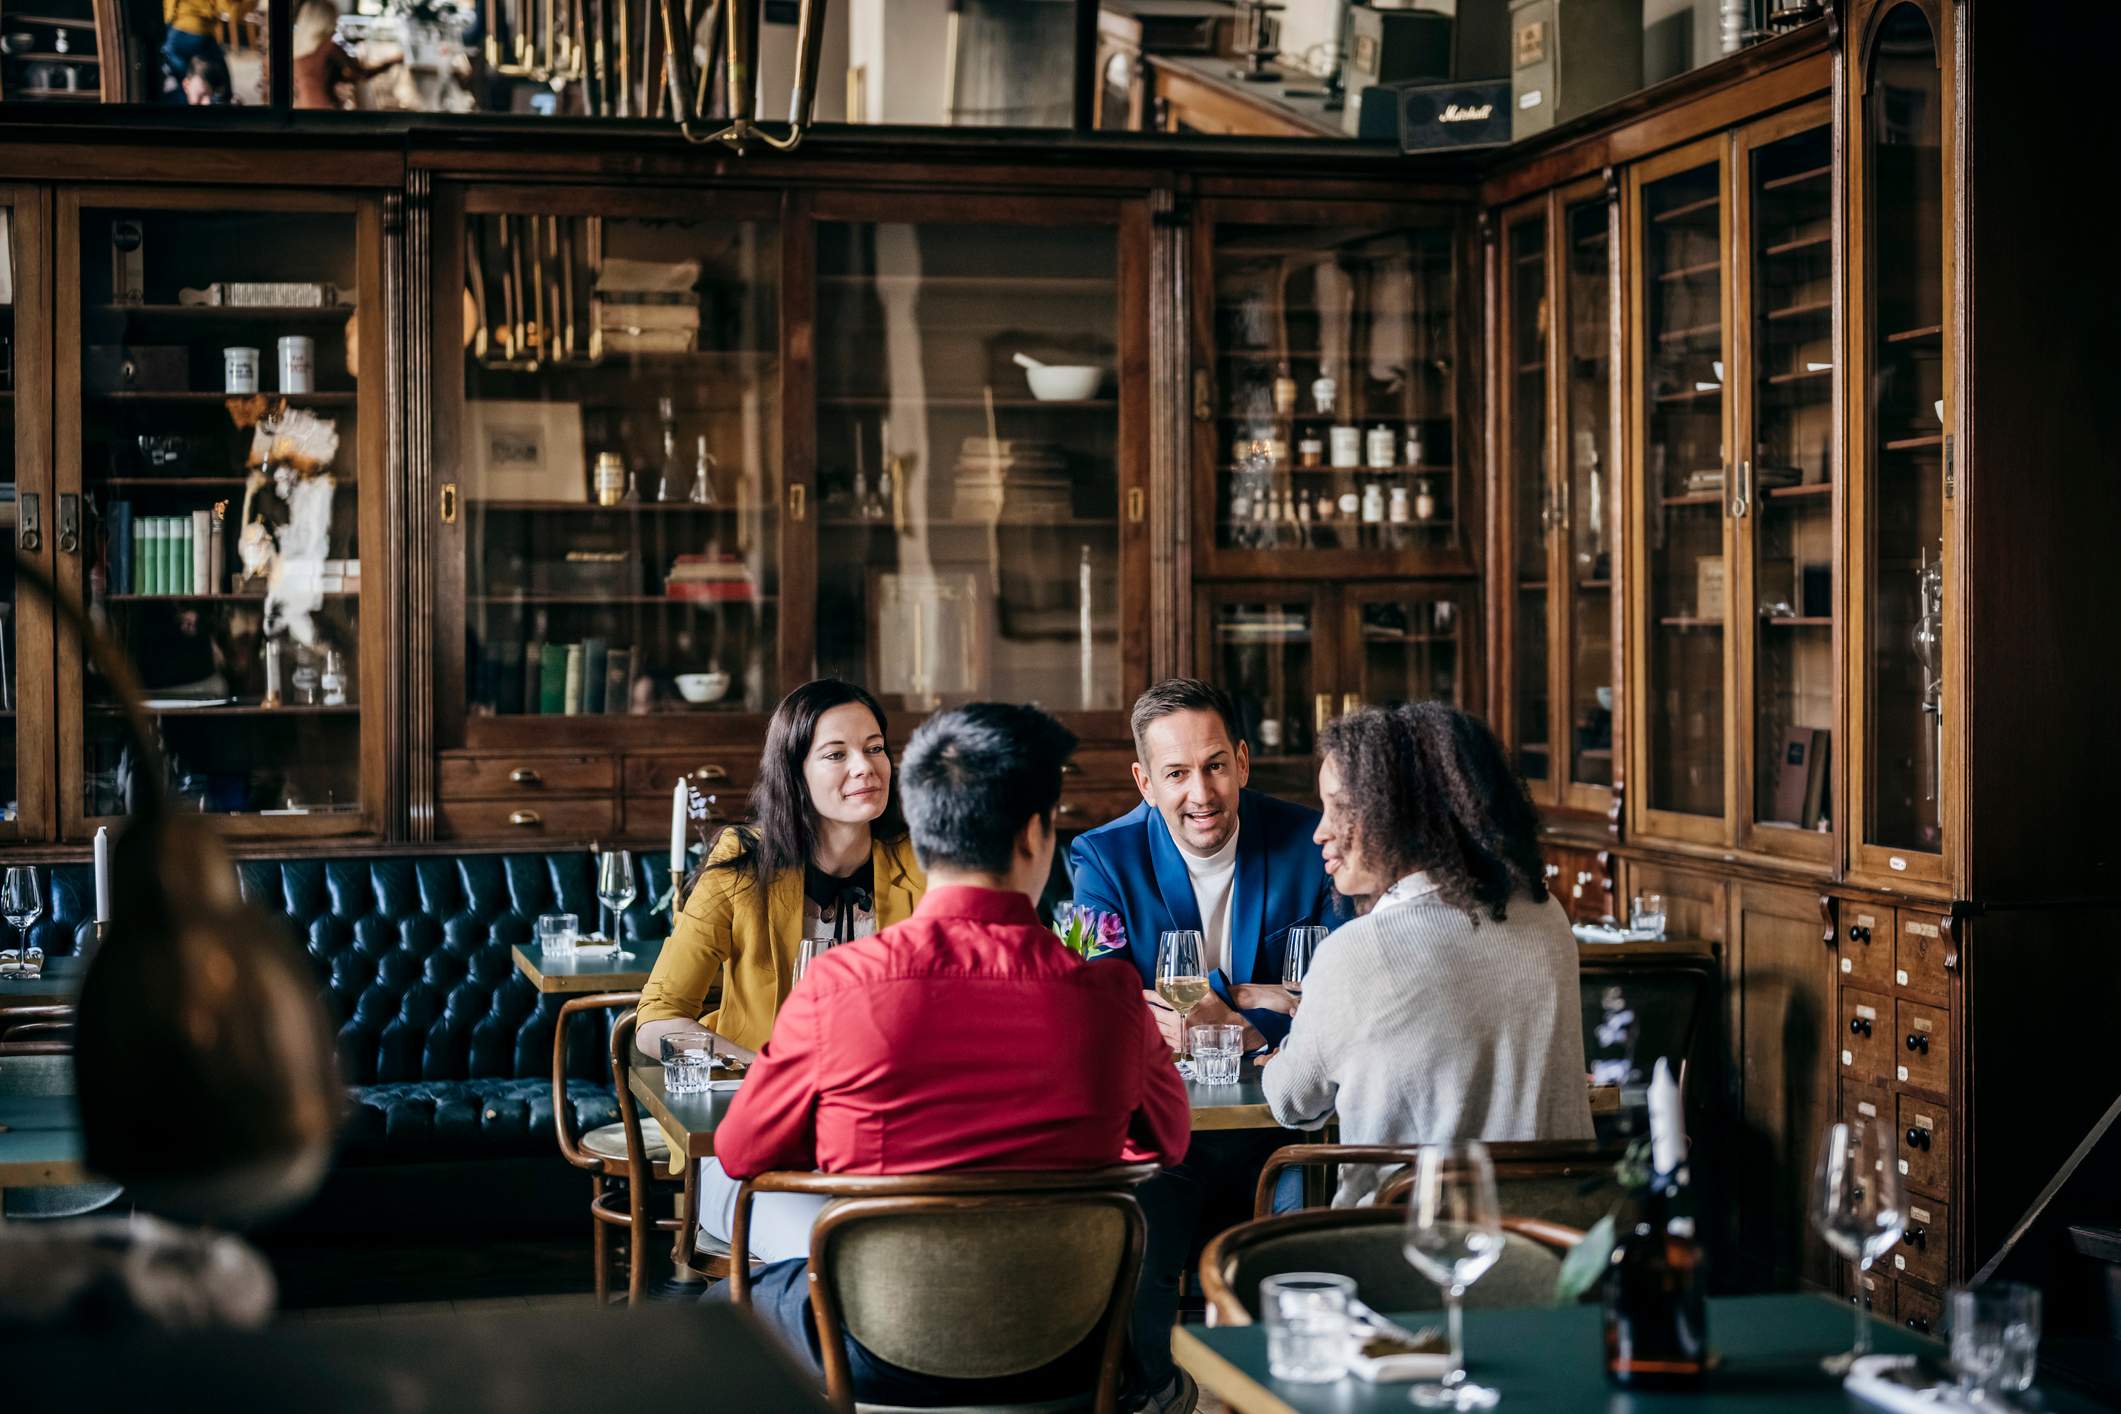 Image depicts four diners sitting together at a table. The restaurant has a vintage office feel, with leather booths and bookcases built into the walls. The diners are all wearing different colors and are chatting amongst themselves. 